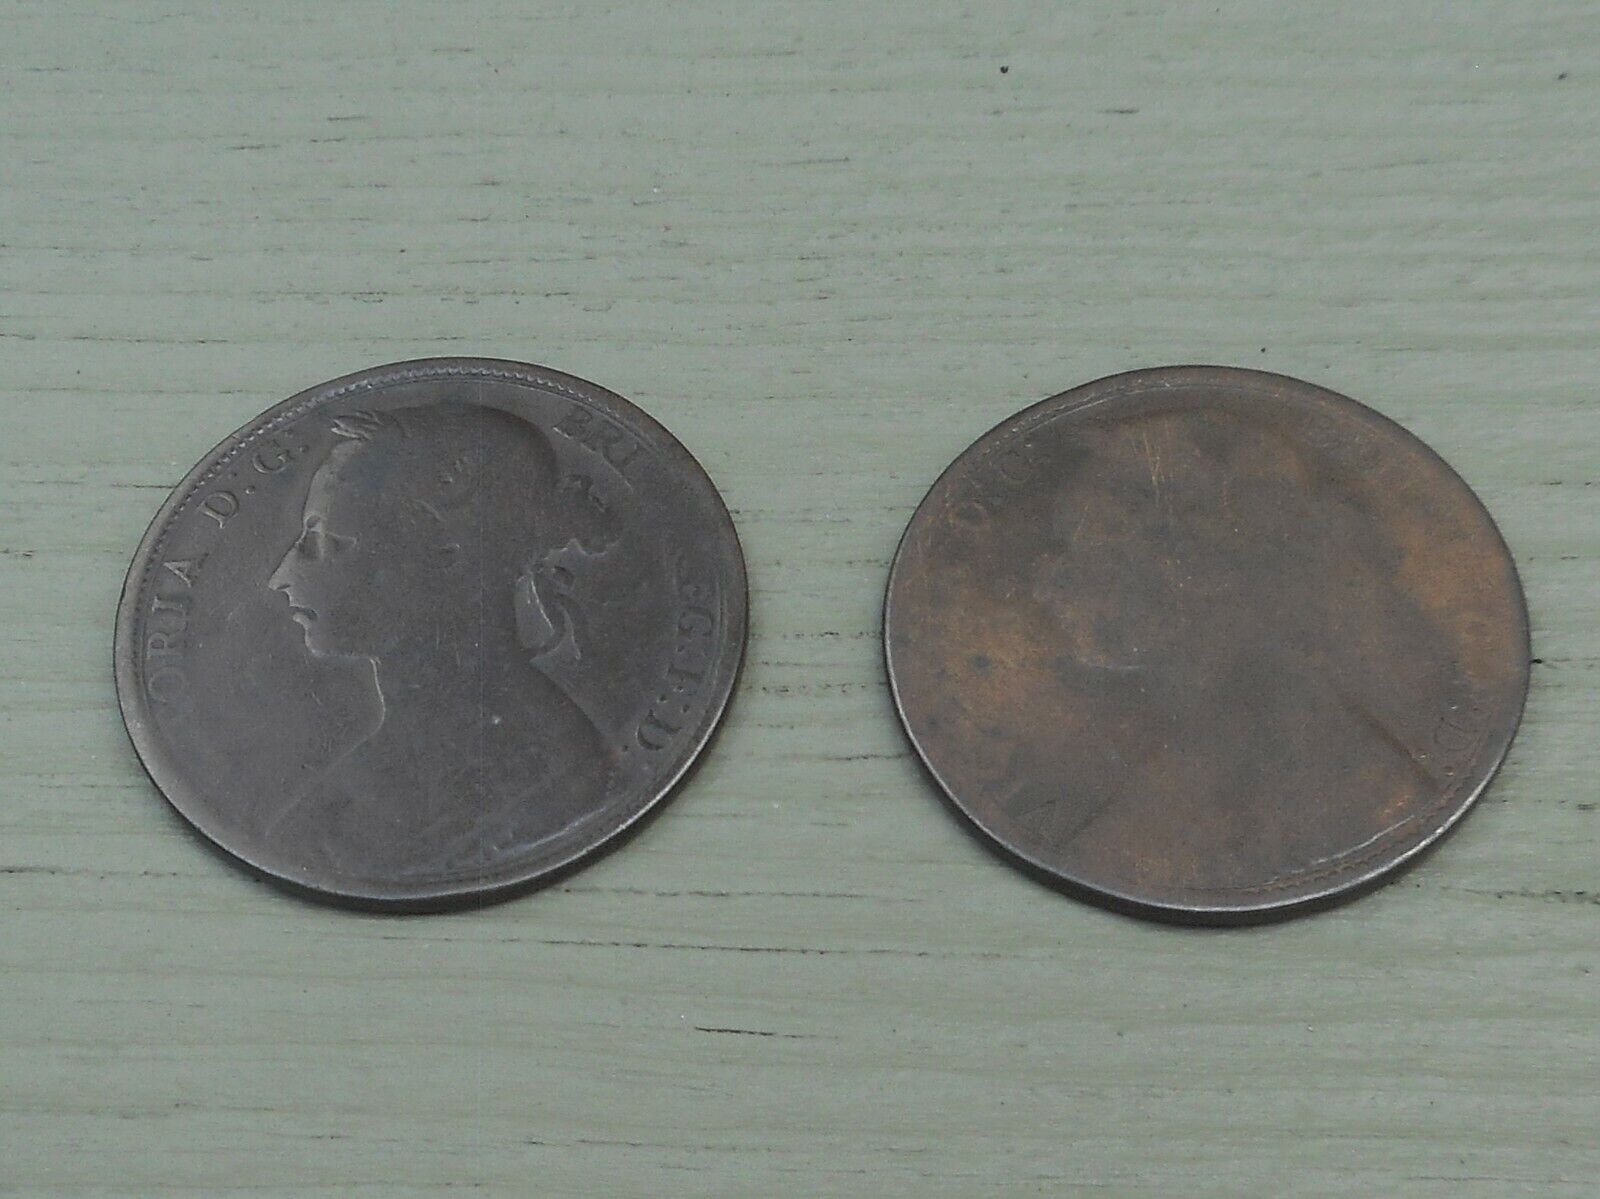 1877 & 1890 LOT OF 2 COINS BRITAIN One Penny 1 Pence Cent Queen Victoria Без бренда - фотография #7